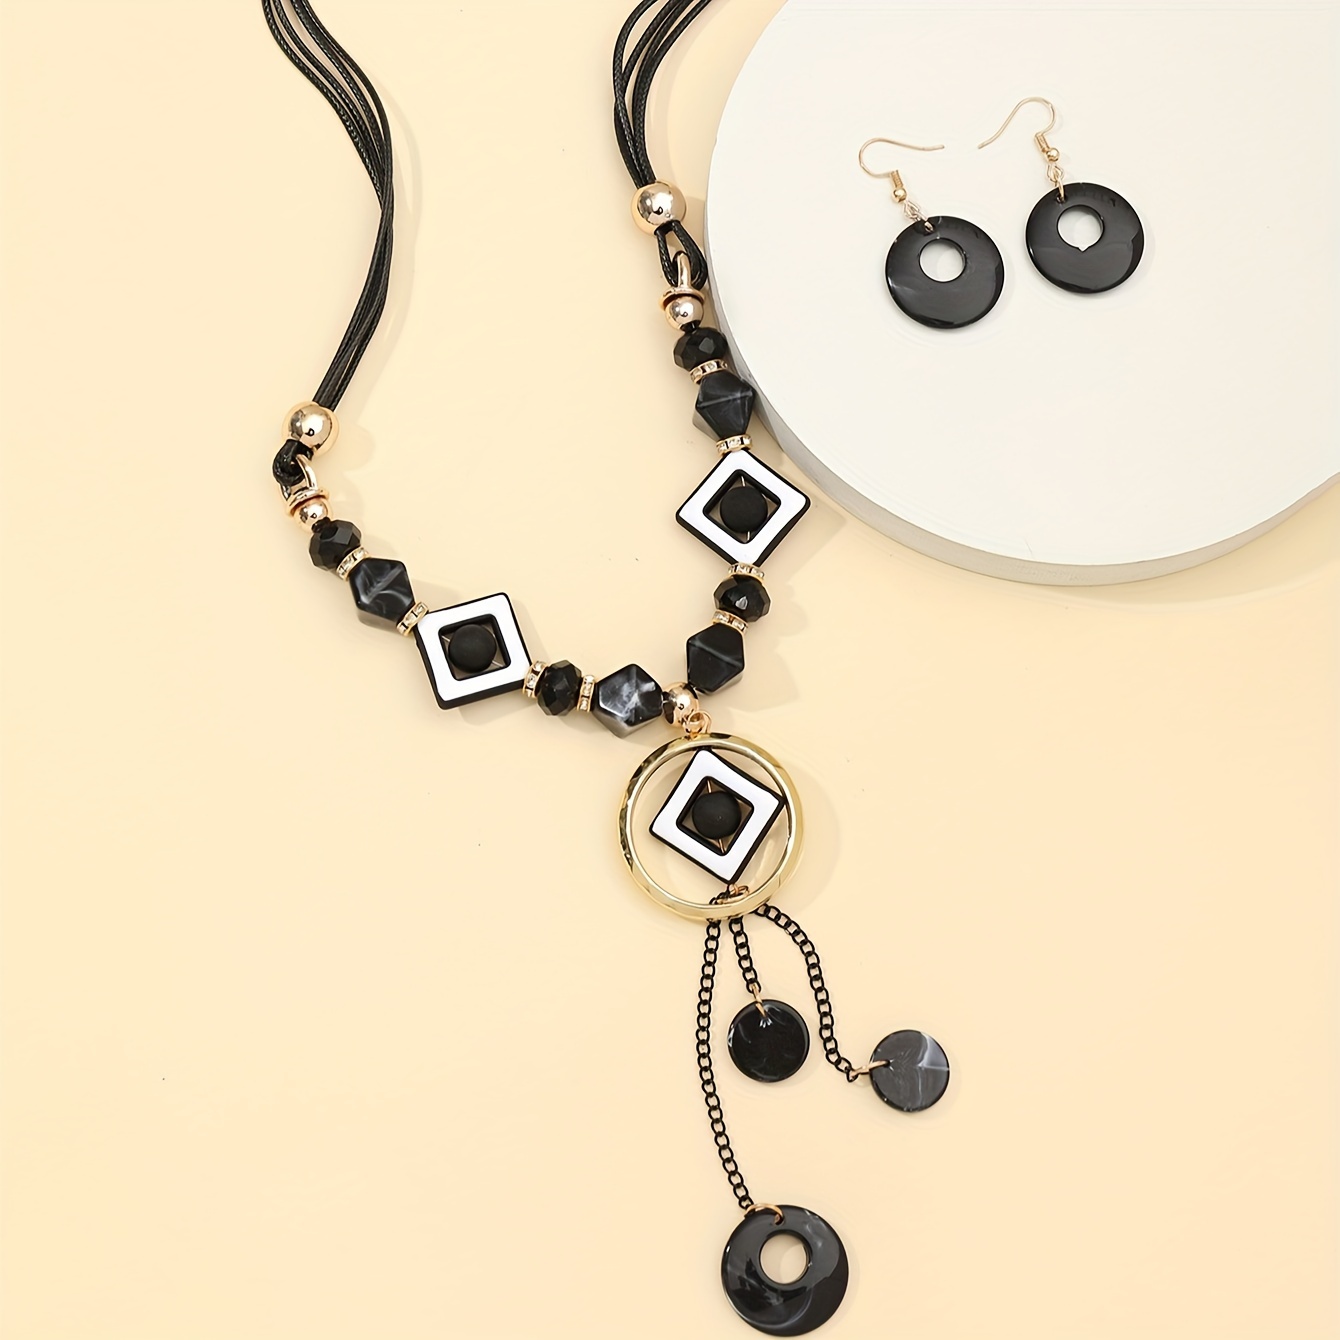 

Trendy Black Geometric Square And Circle Shaped Jewelry Set Necklace And Earrings Set Minimalist Style Jewelry Accessories For Women